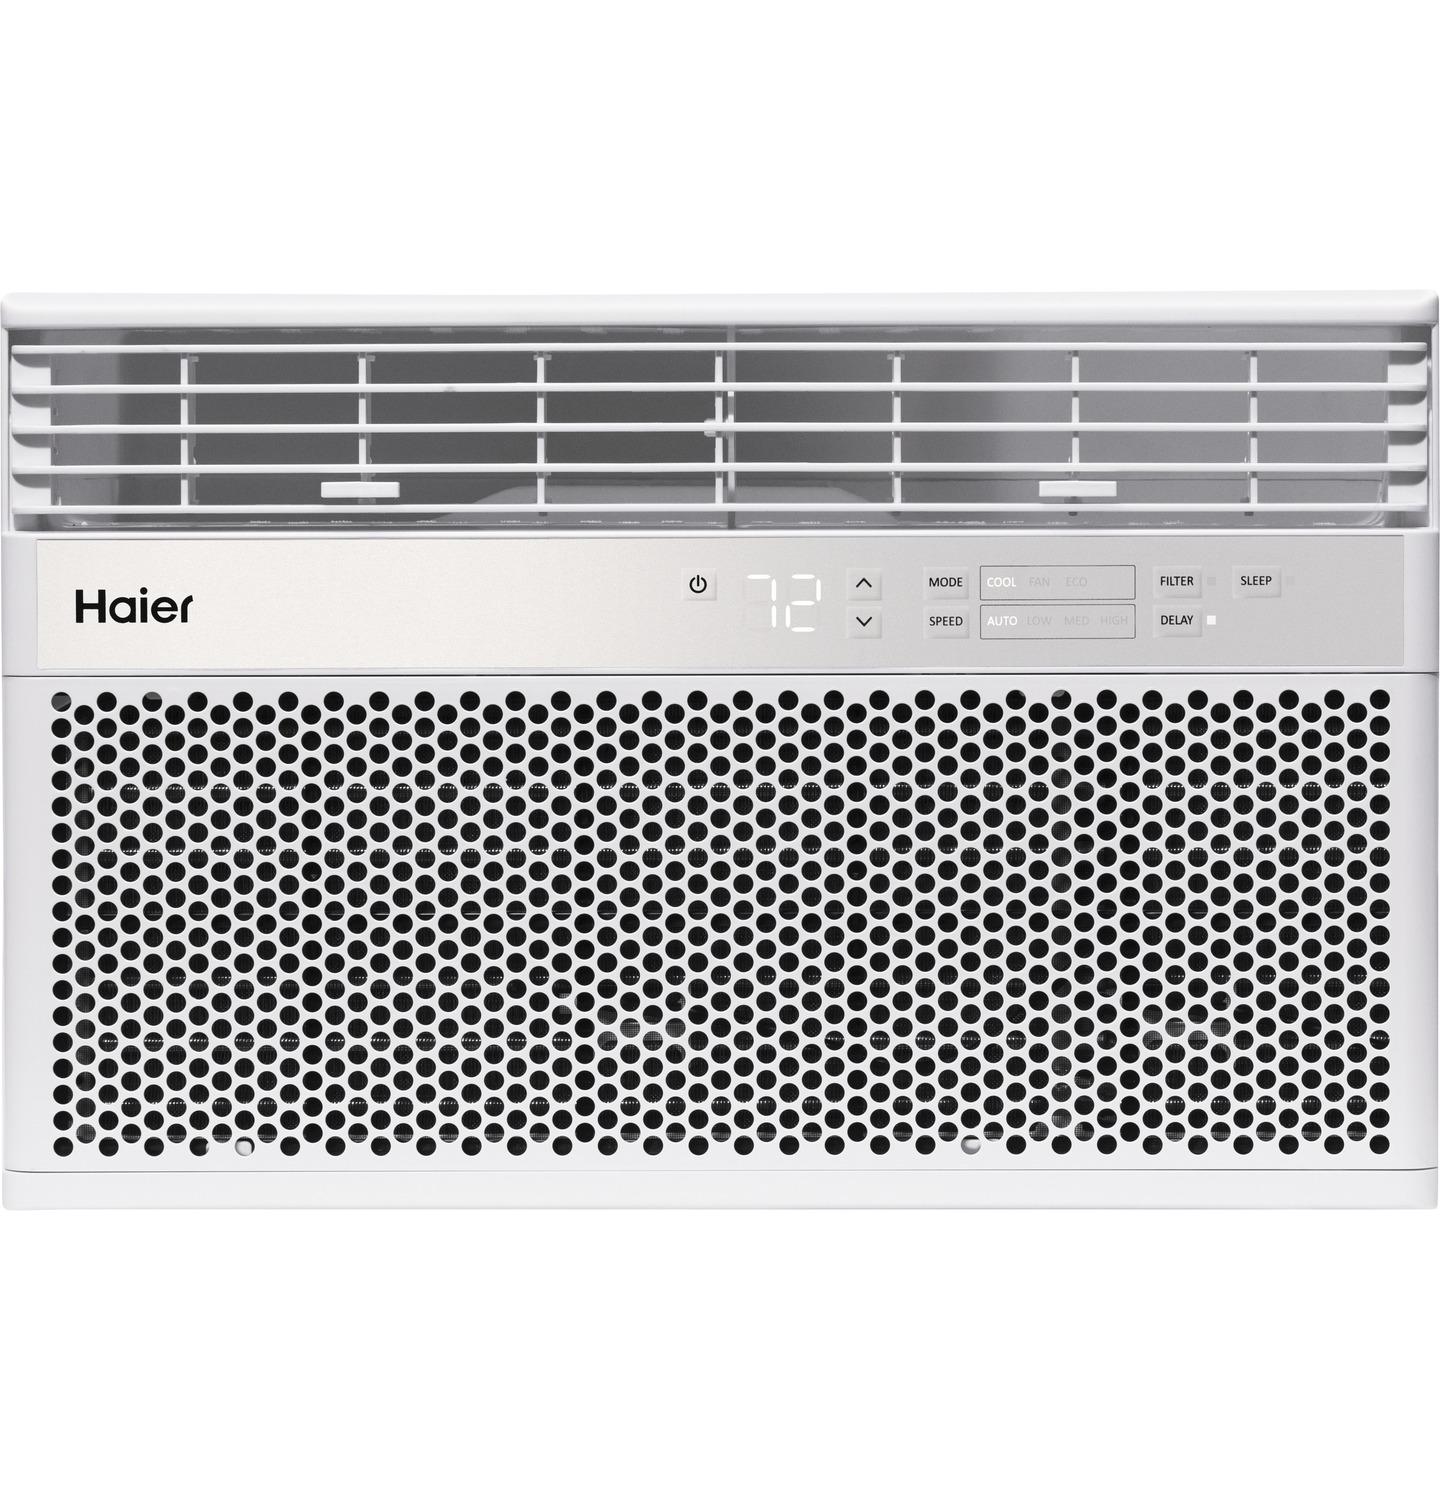 Haier ENERGY STAR® 115 Volt Electronic Room Air Conditioner